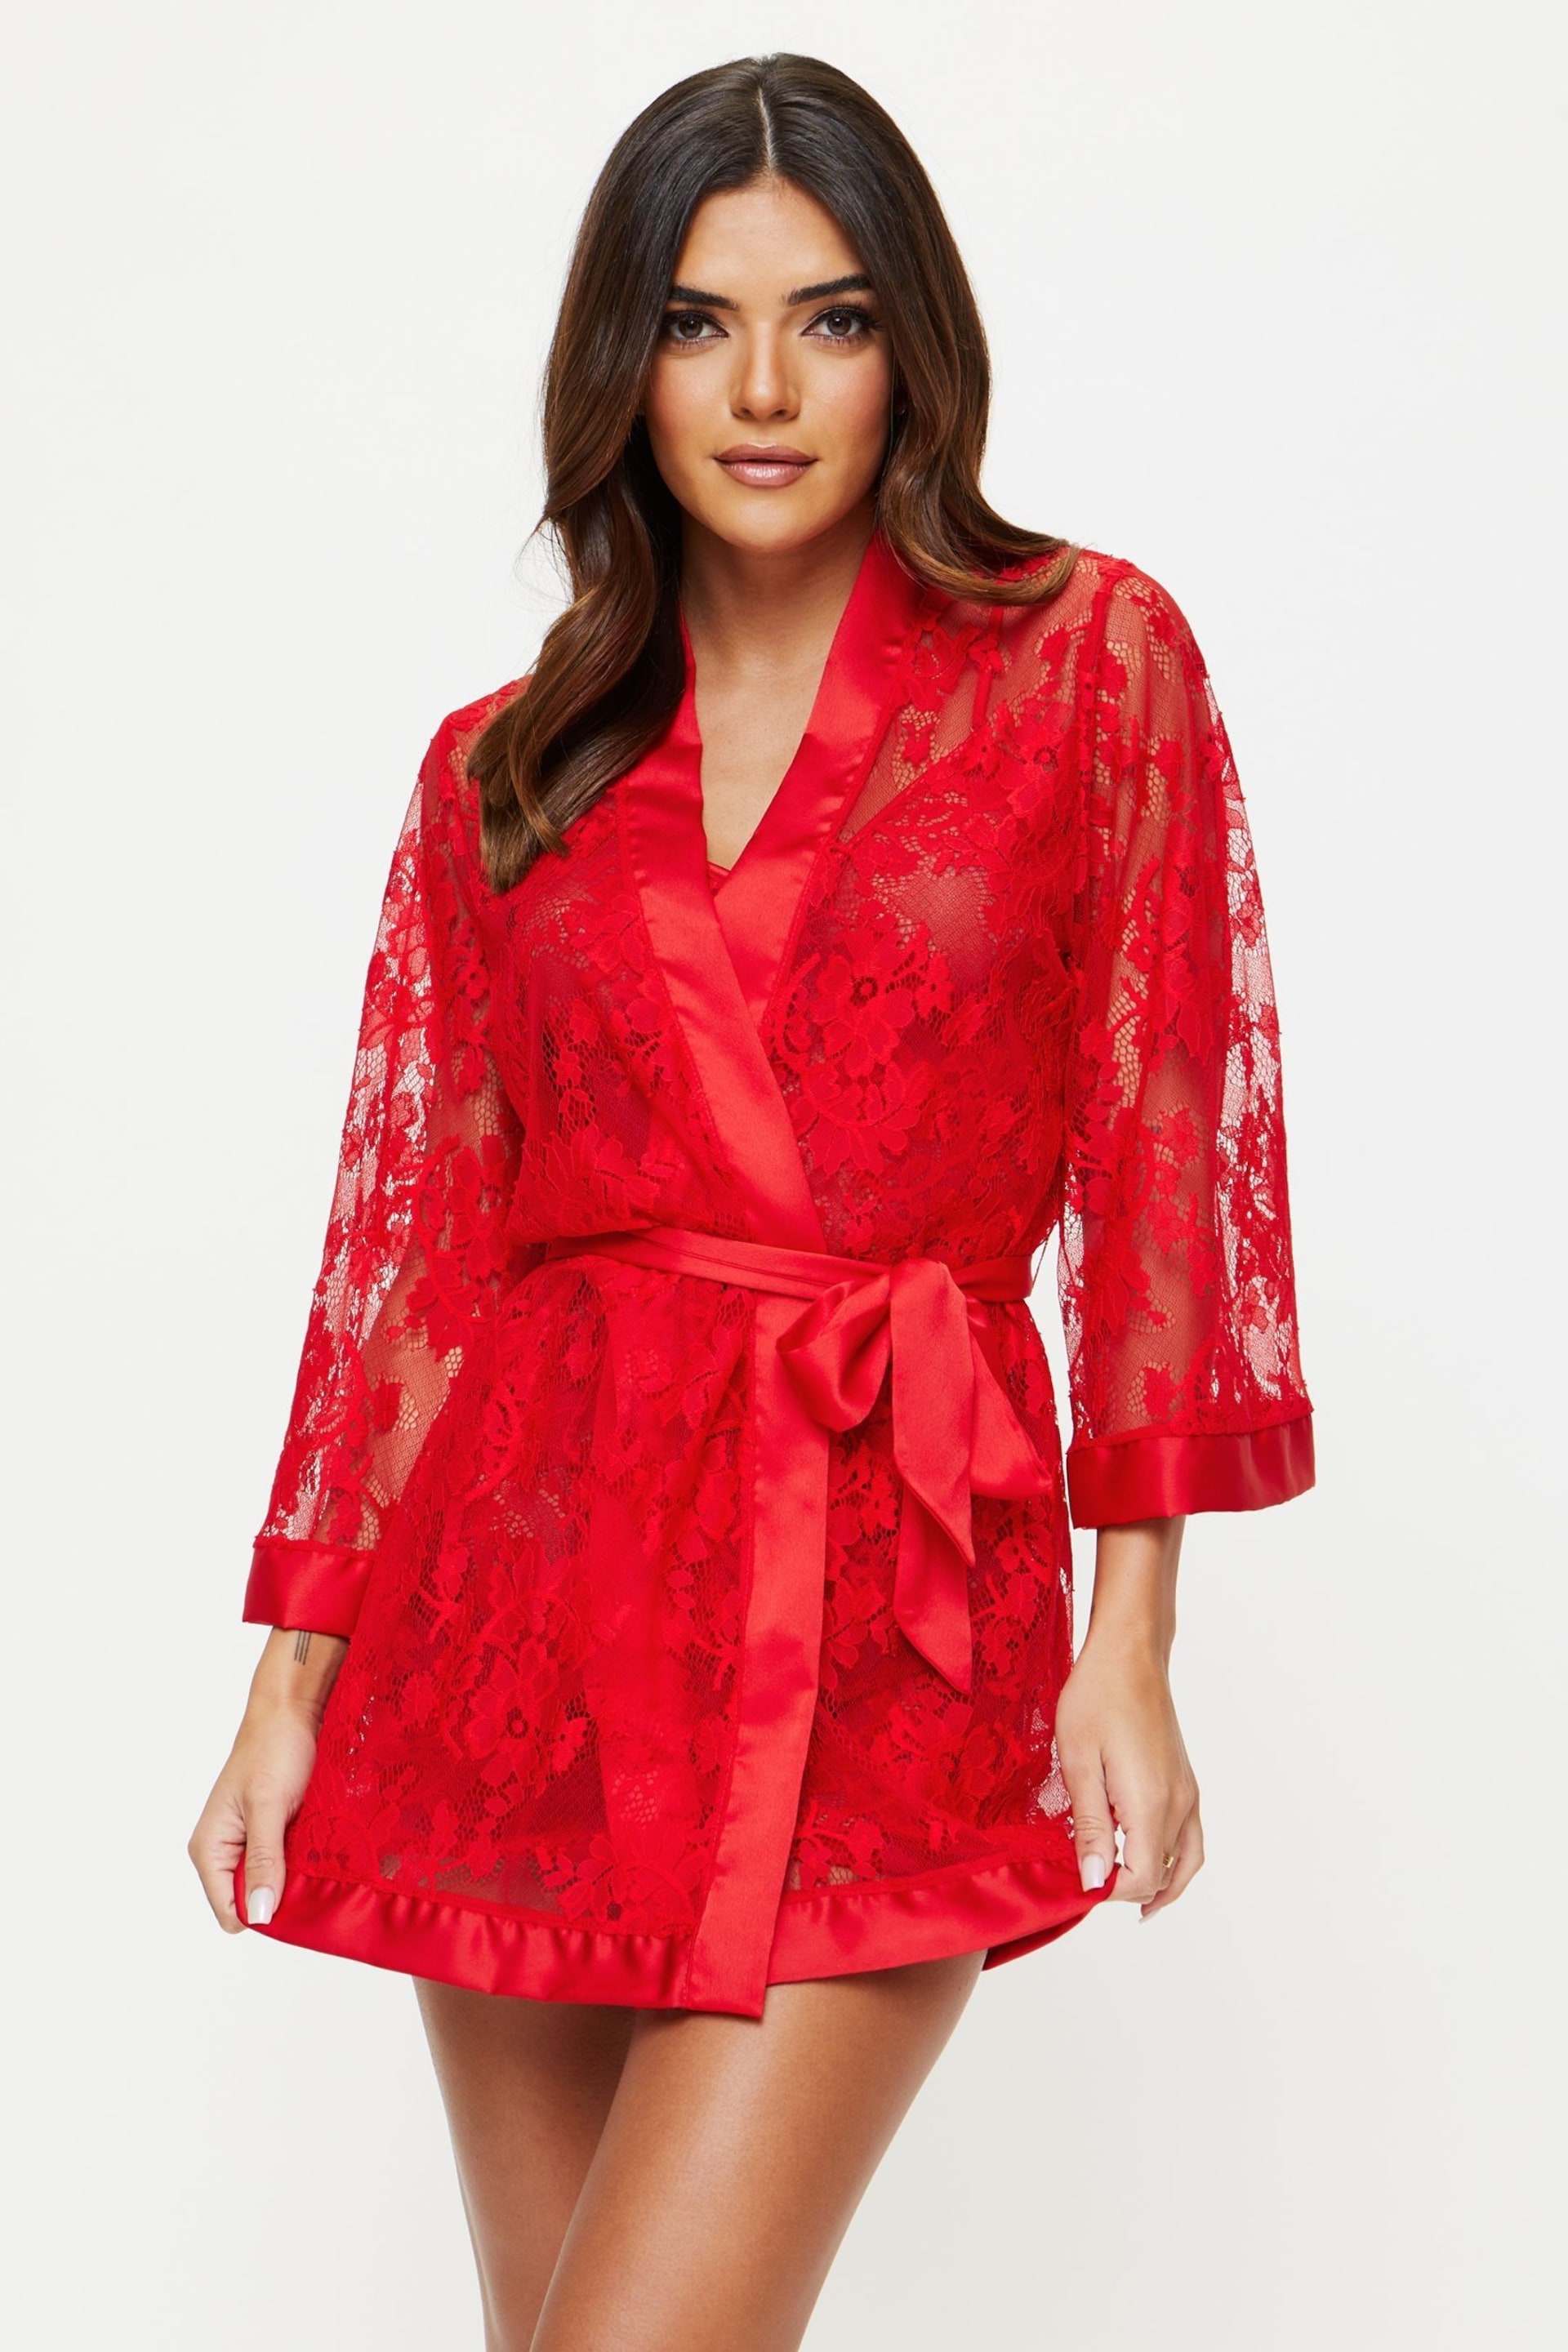 Ann Summers Red The Dark Hours Robe Dressing Gown - Image 2 of 4